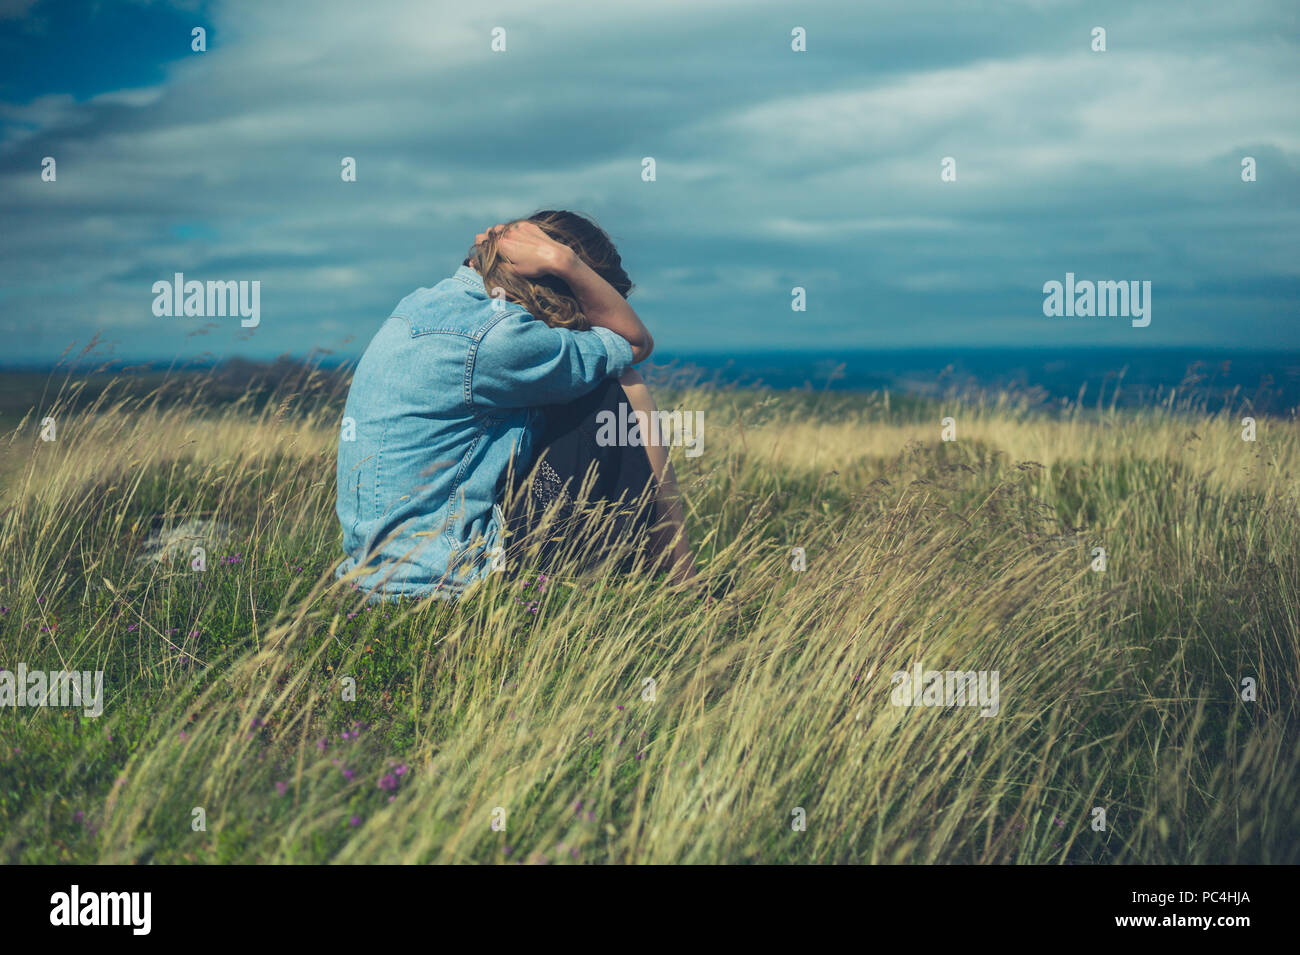 A sad woman is sitting in a field on a windy day Stock Photo